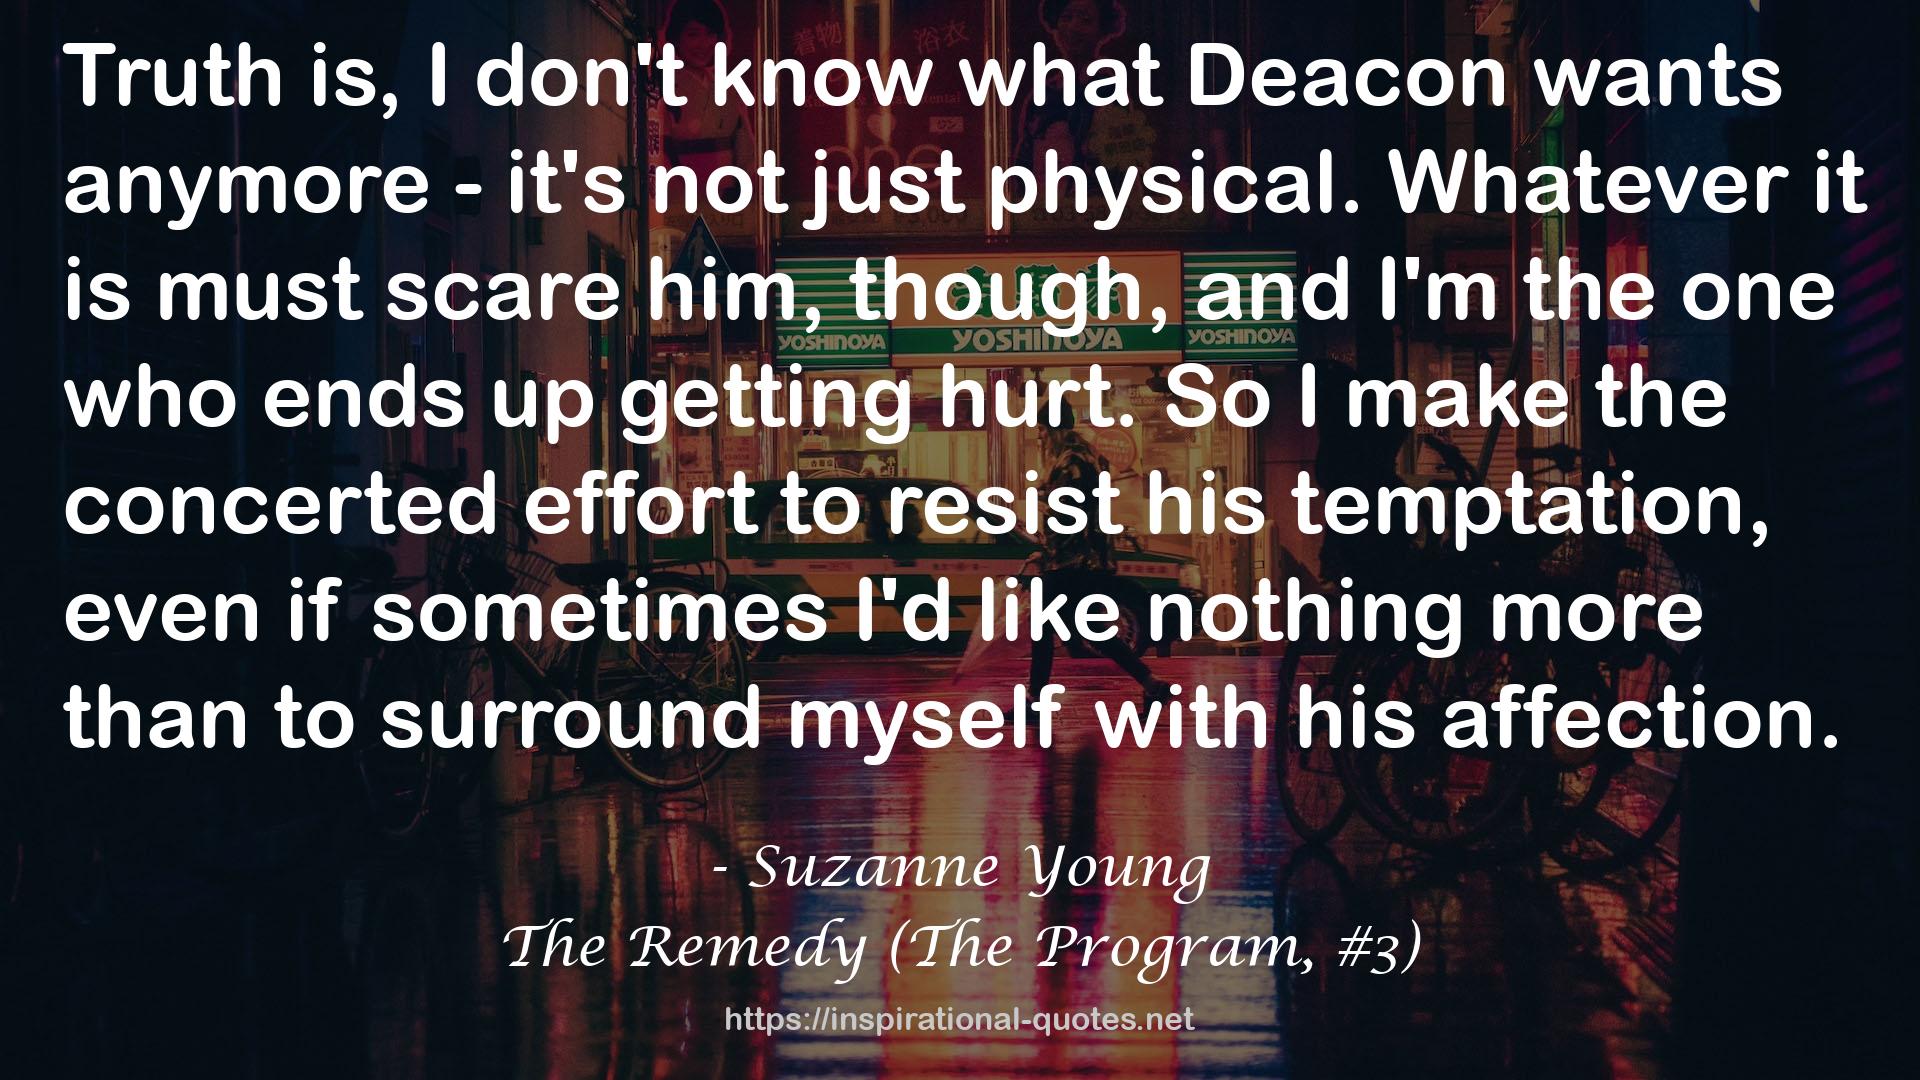 The Remedy (The Program, #3) QUOTES